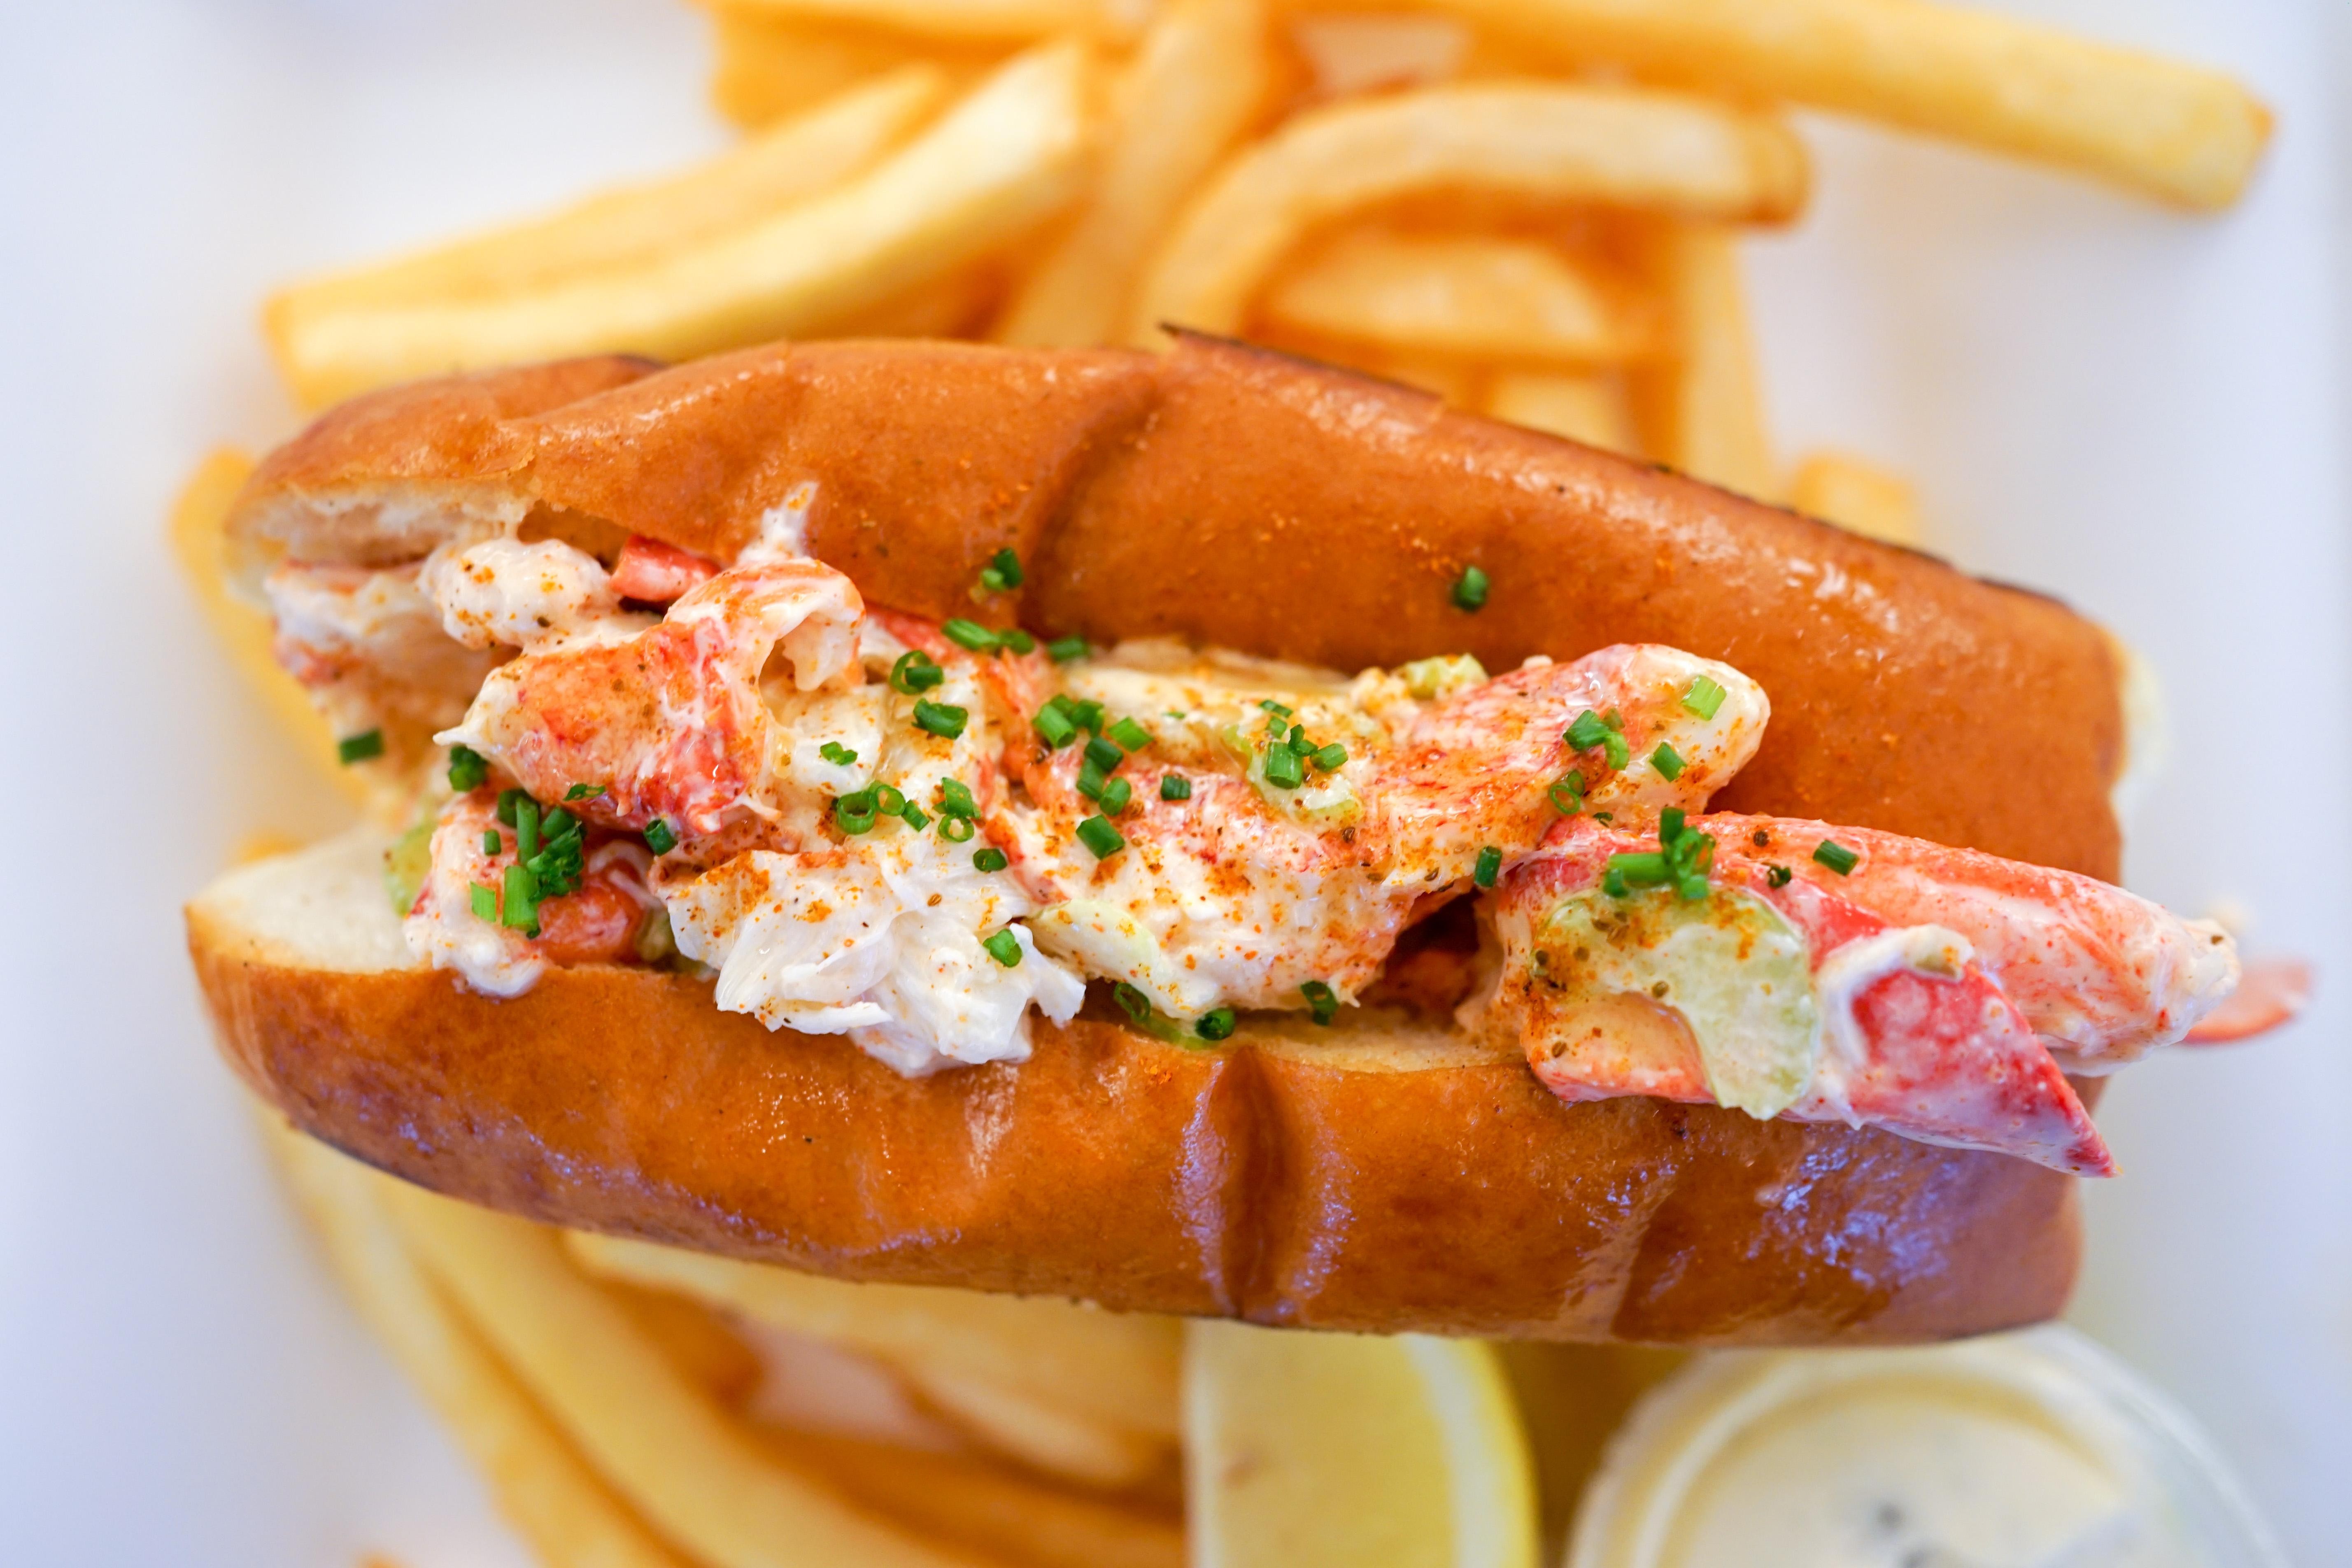 COLD MAINE LOBSTER ROLL